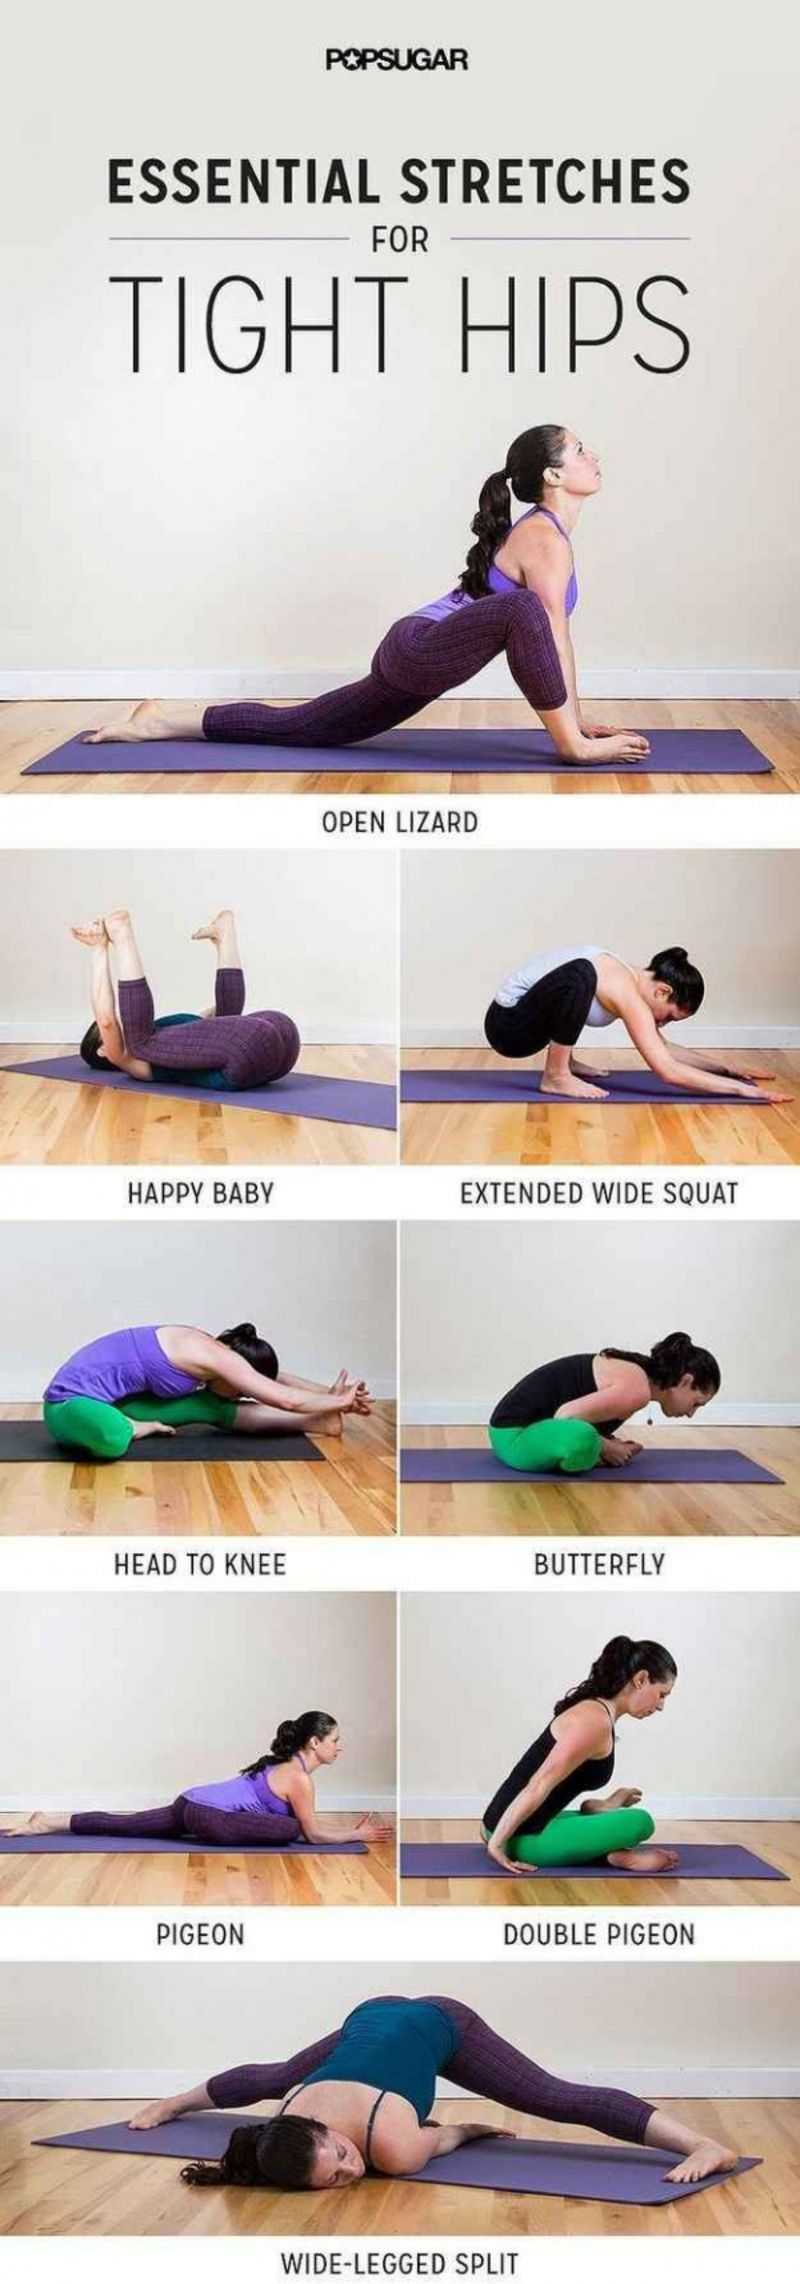 Stretches For Tight Hips